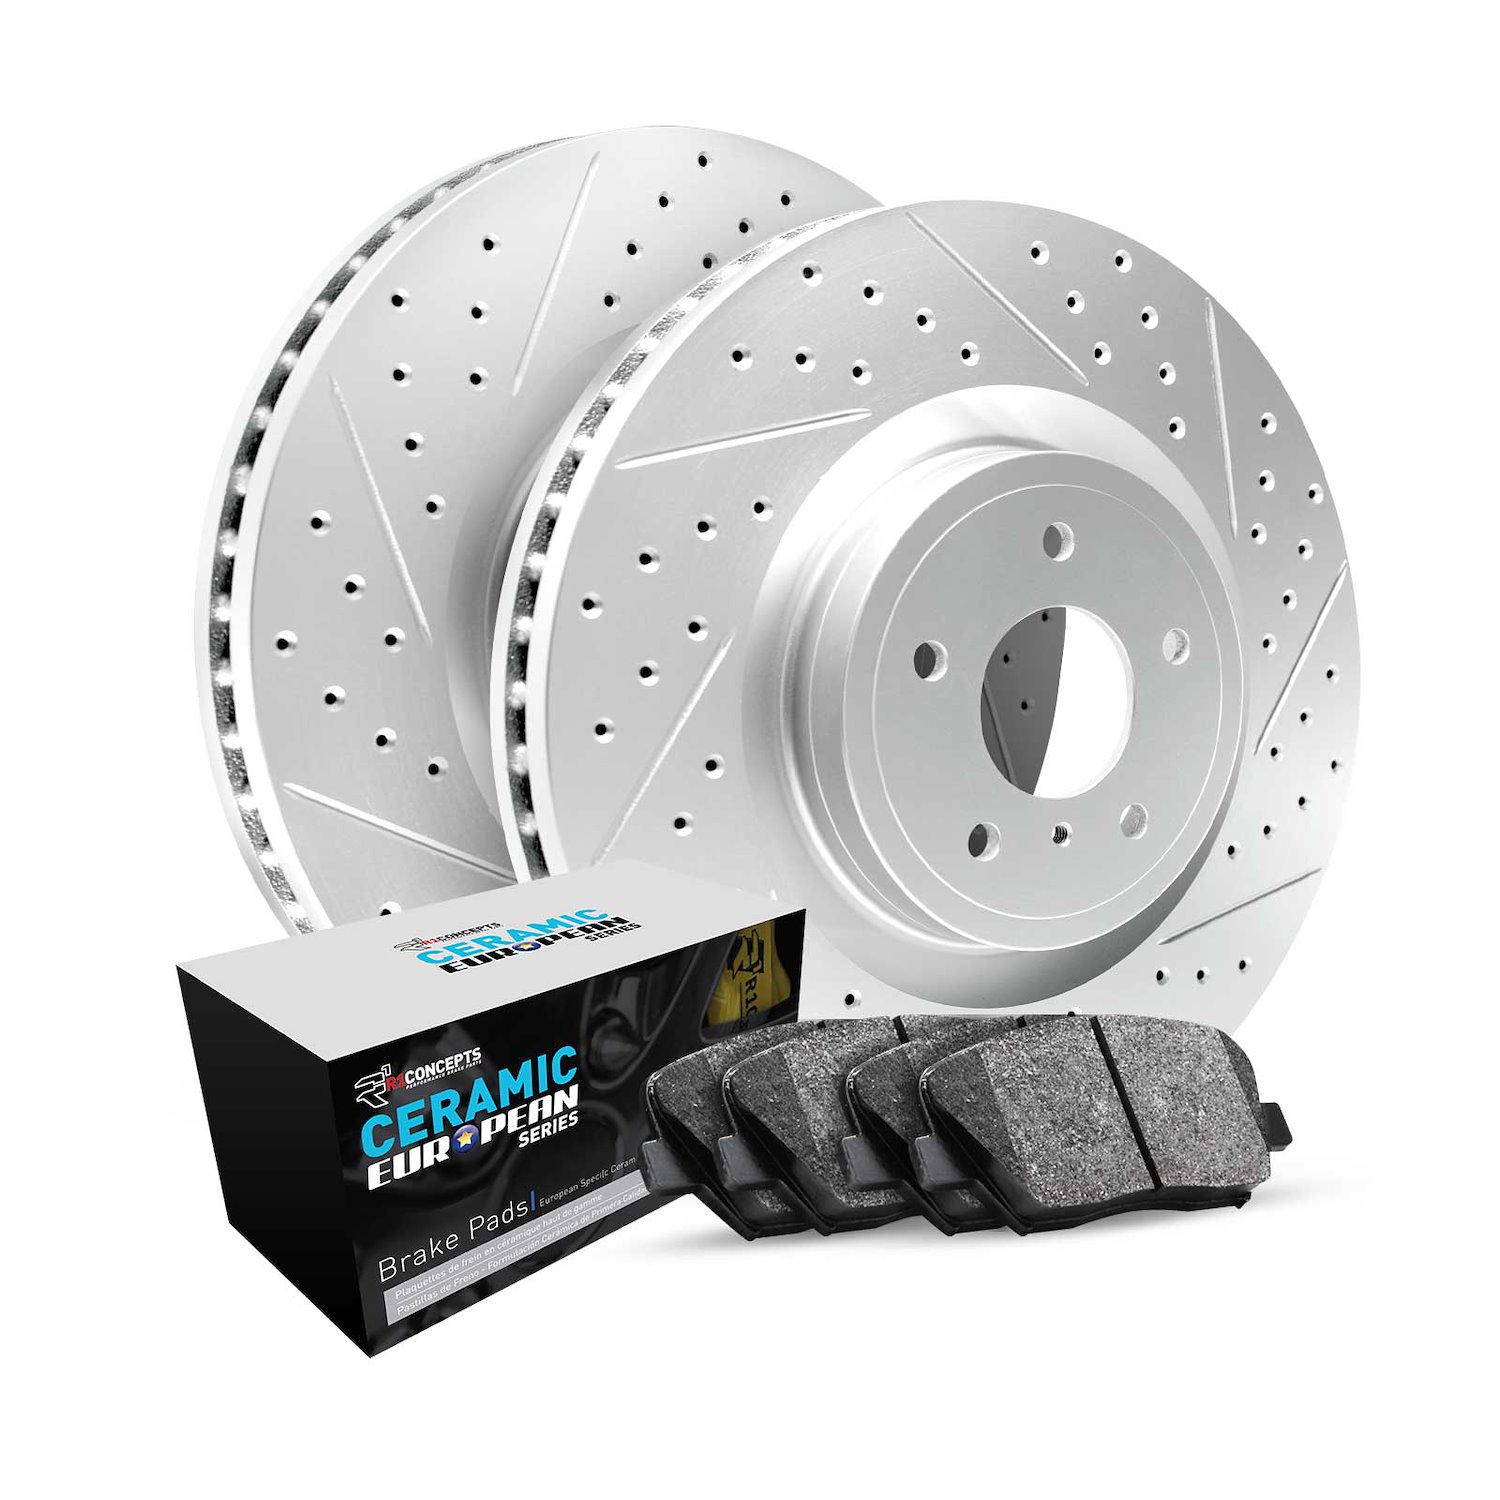 GEO-Carbon Drilled/Slotted Rotor Set w/Euro Ceramic Pads,